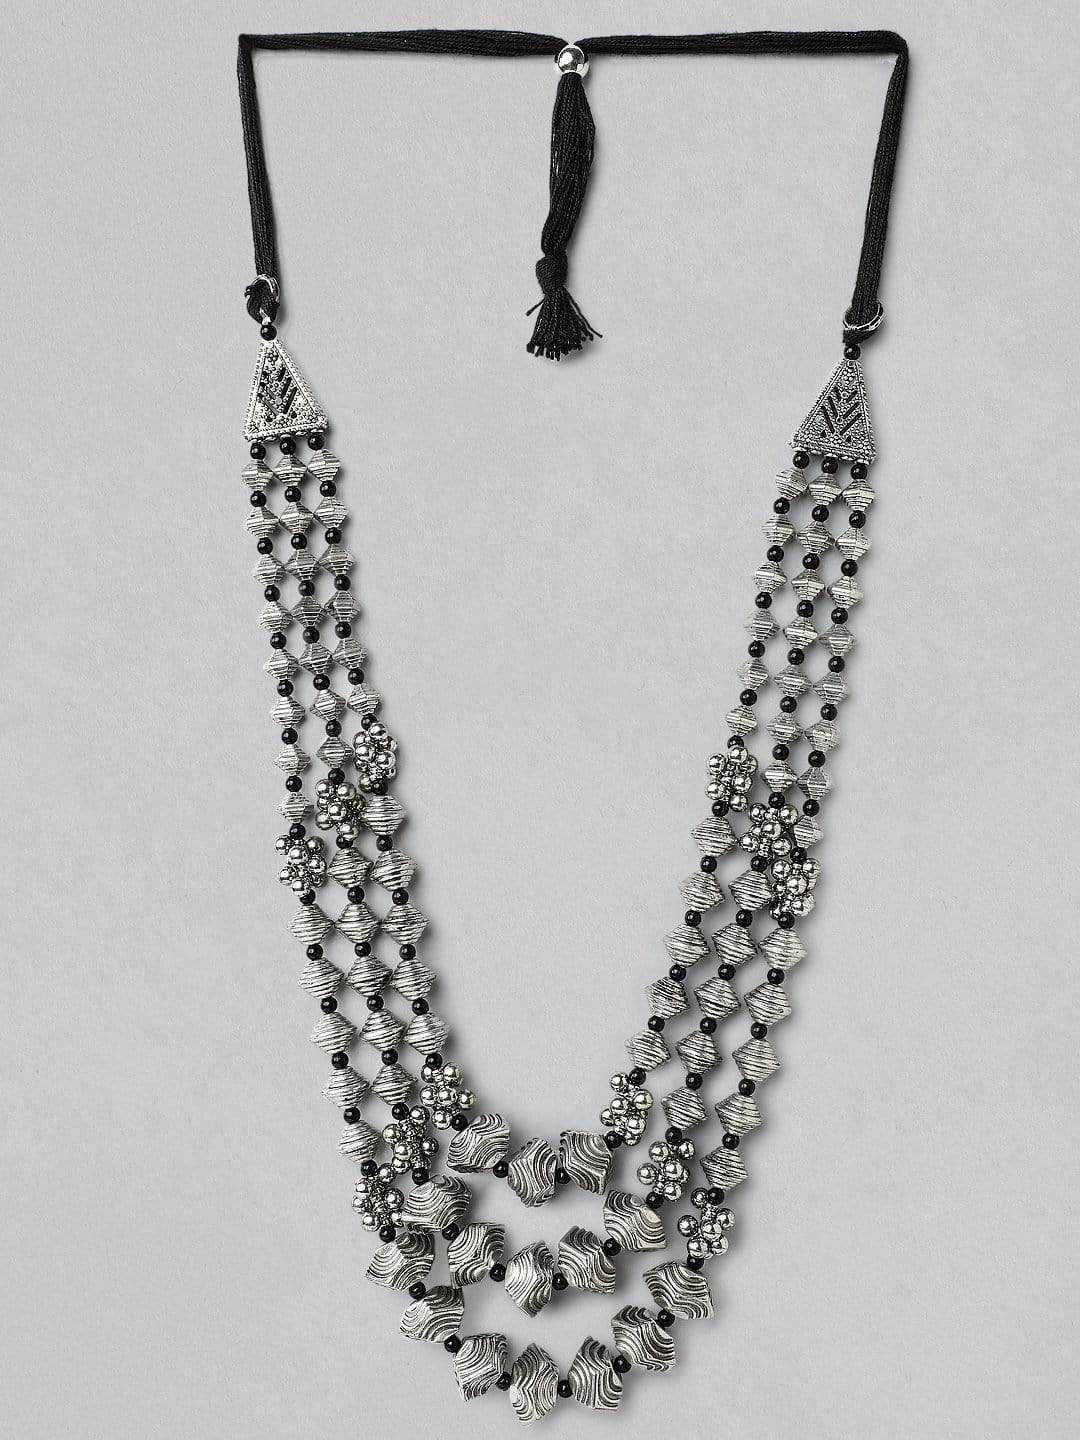 Rubans Silver Plated Oxidised Handcrafted Multi Layer Boho Necklace Necklace Set